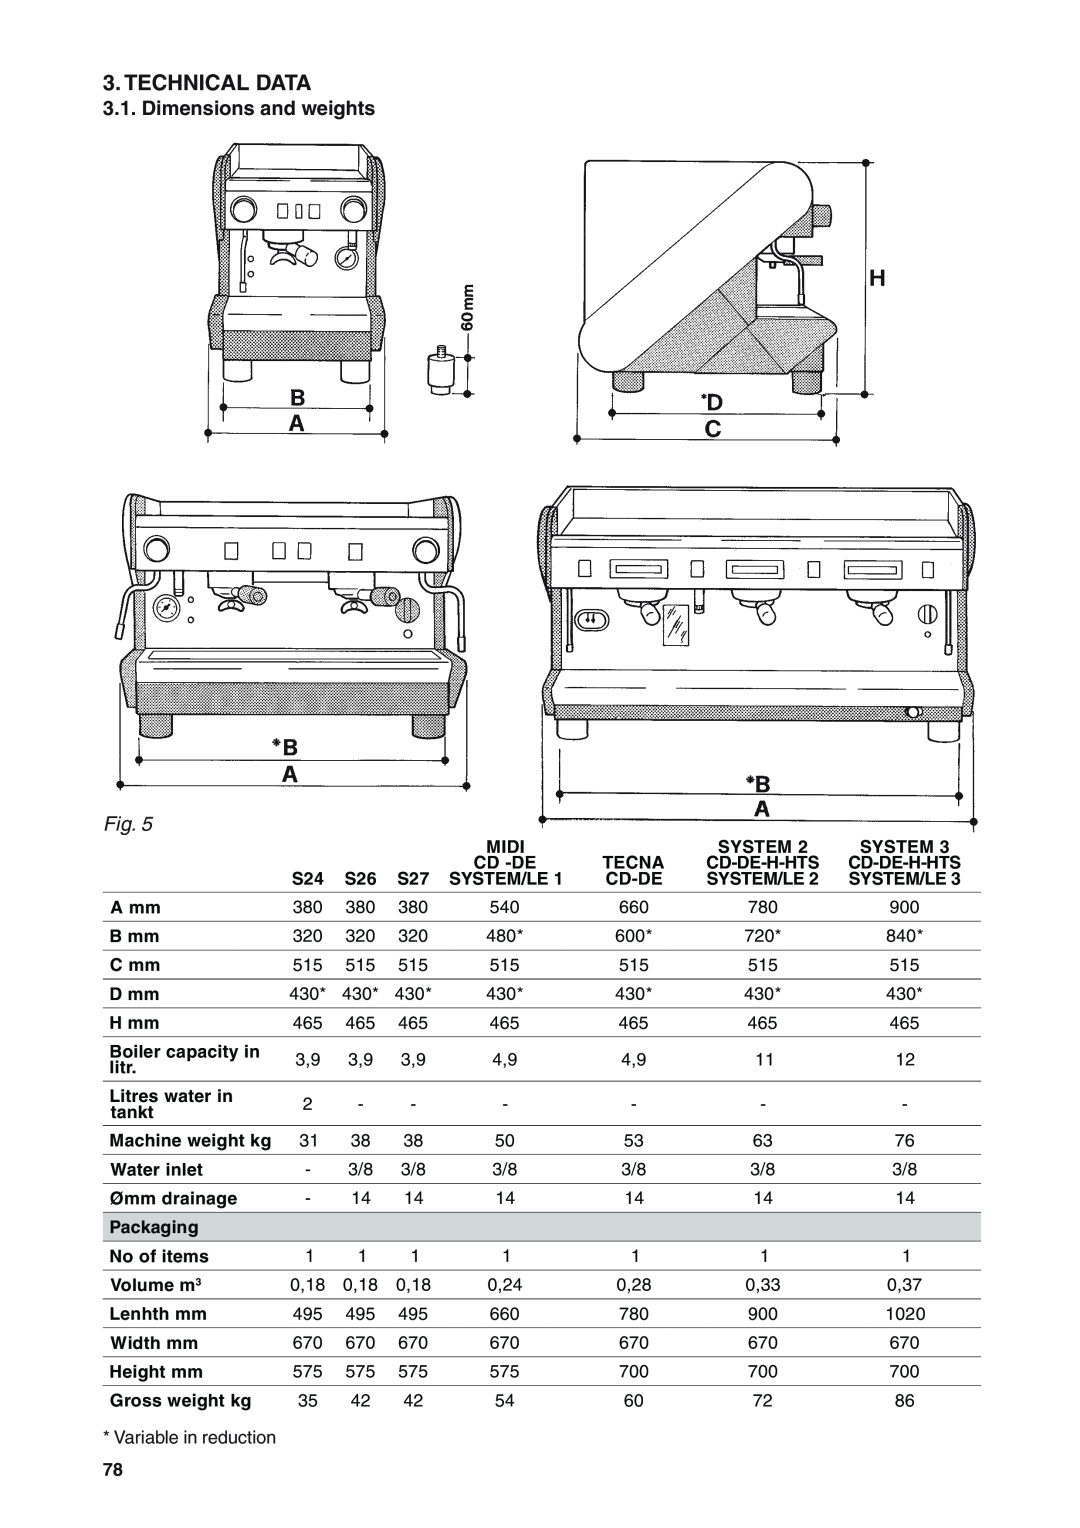 Rancilio S20 manual Technical Data, Dimensions and weights 